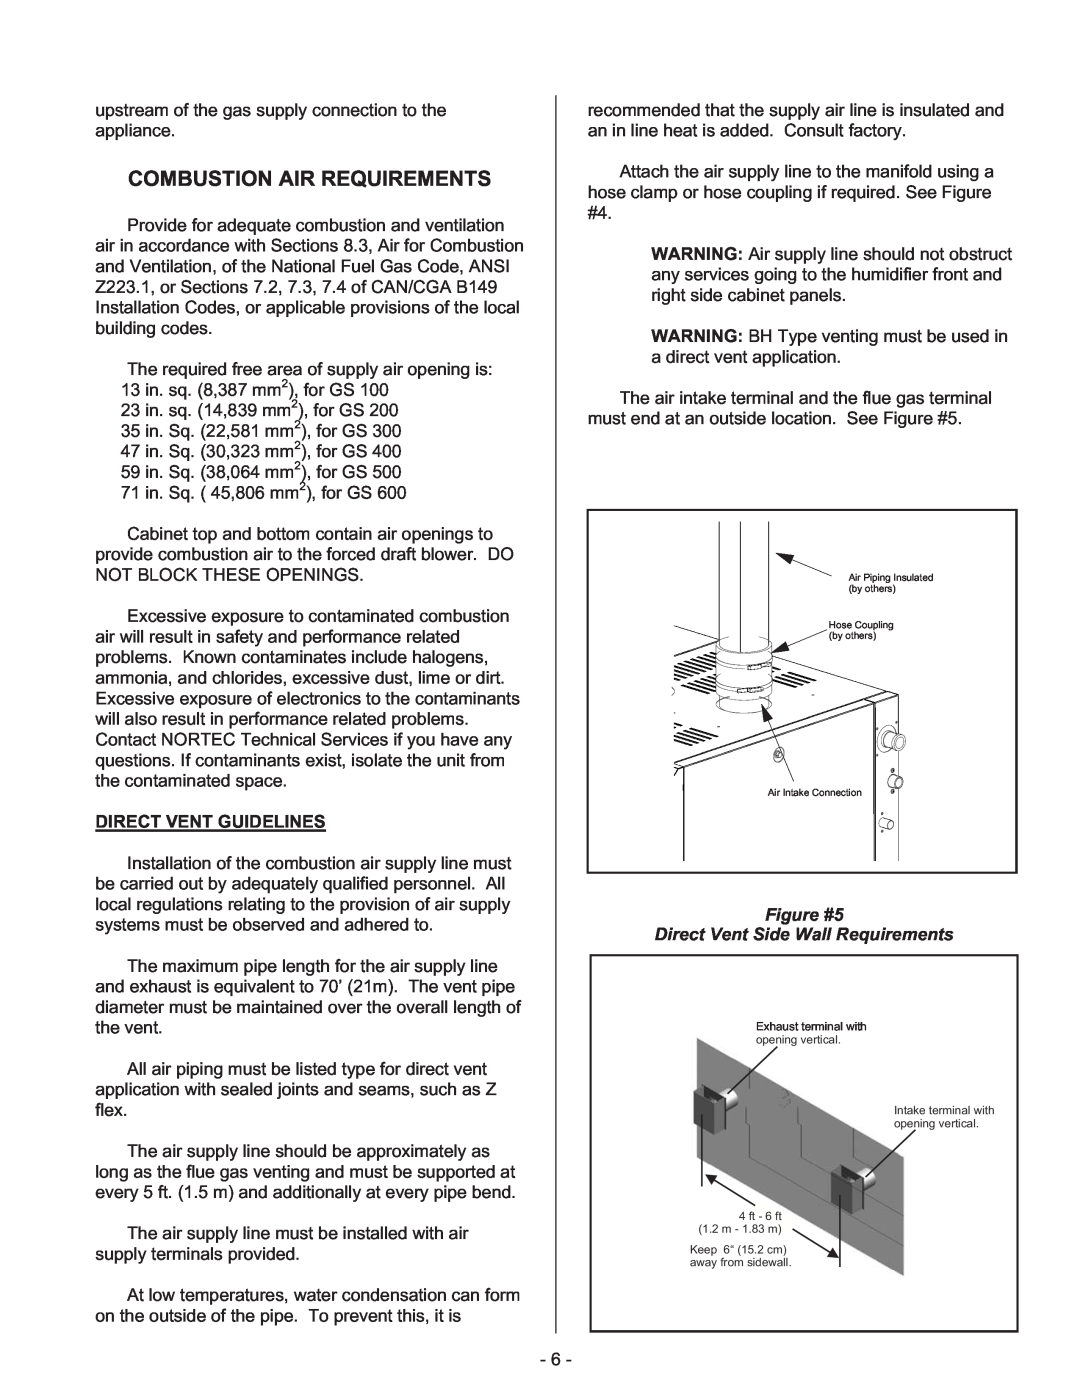 Nortec Industries GS Series manual Combustion Air Requirements, Figure #5 Direct Vent Side Wall Requirements 